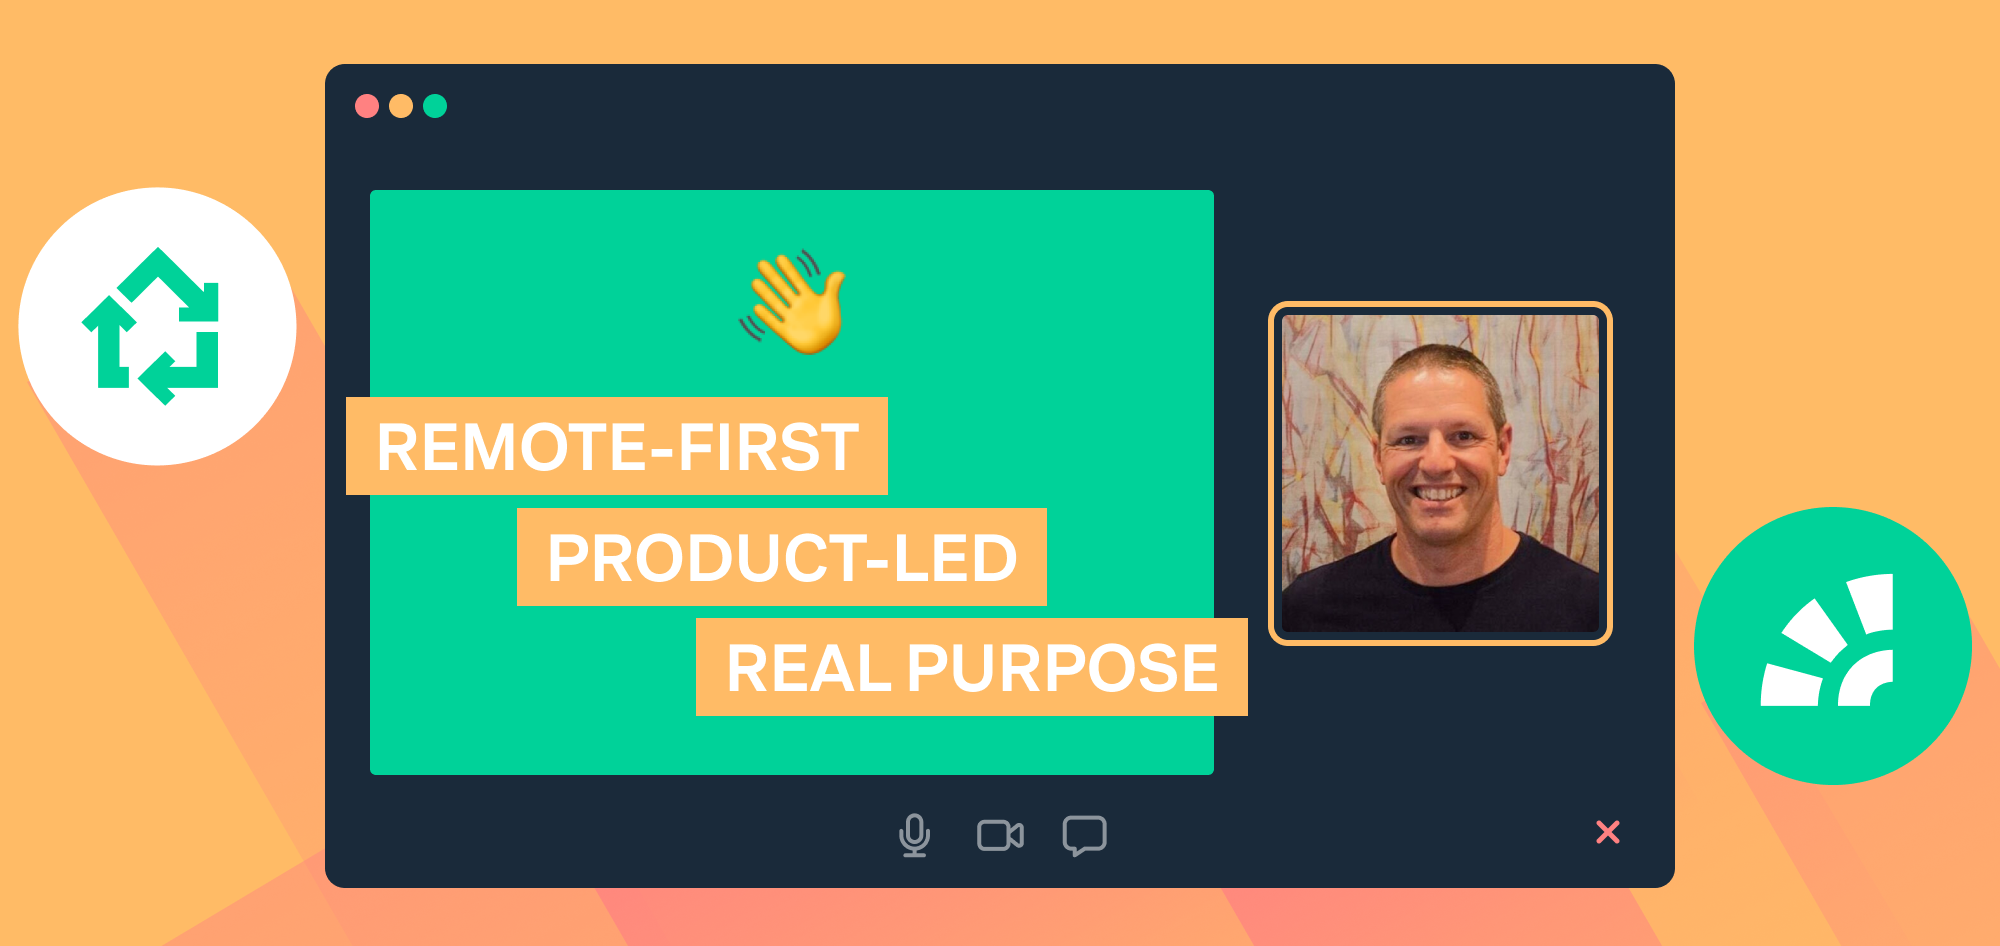 Remote first, product led, real purpose